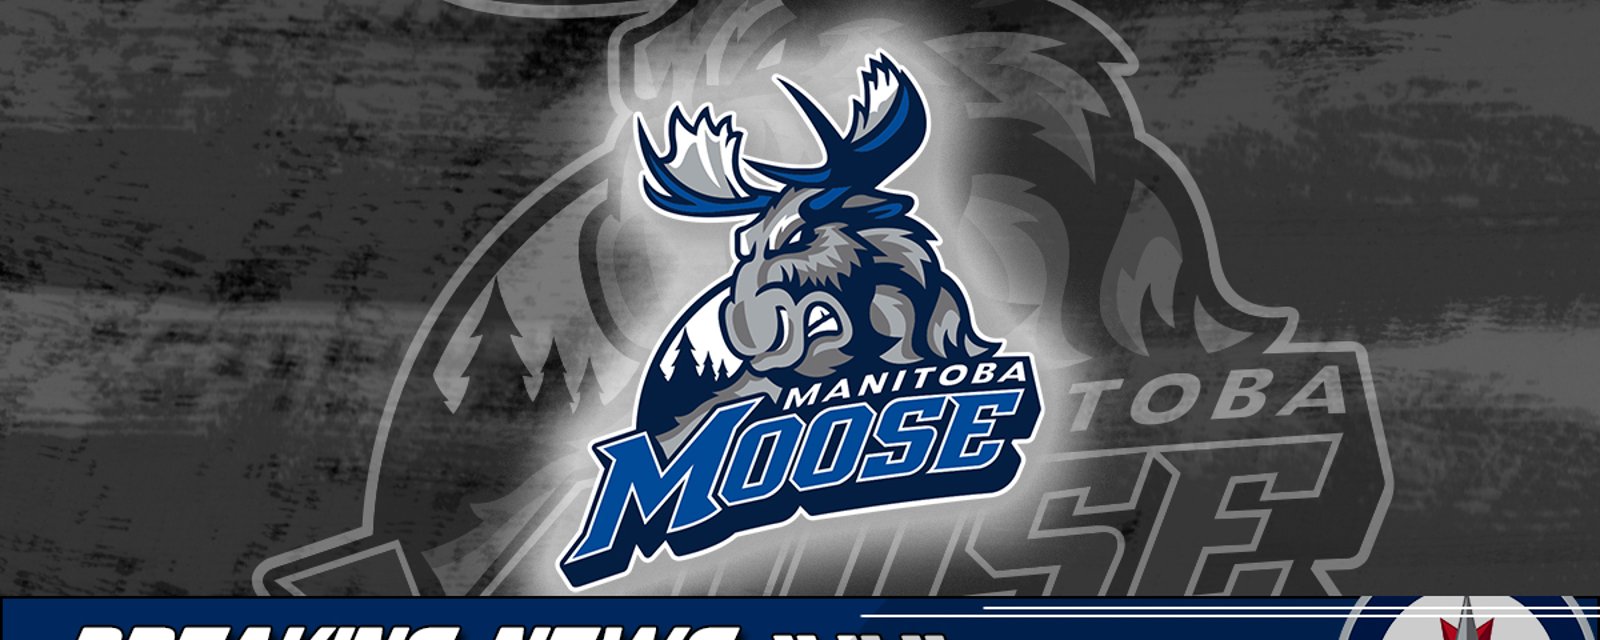 Breaking: The Jets have recalled a forward from the Moose!